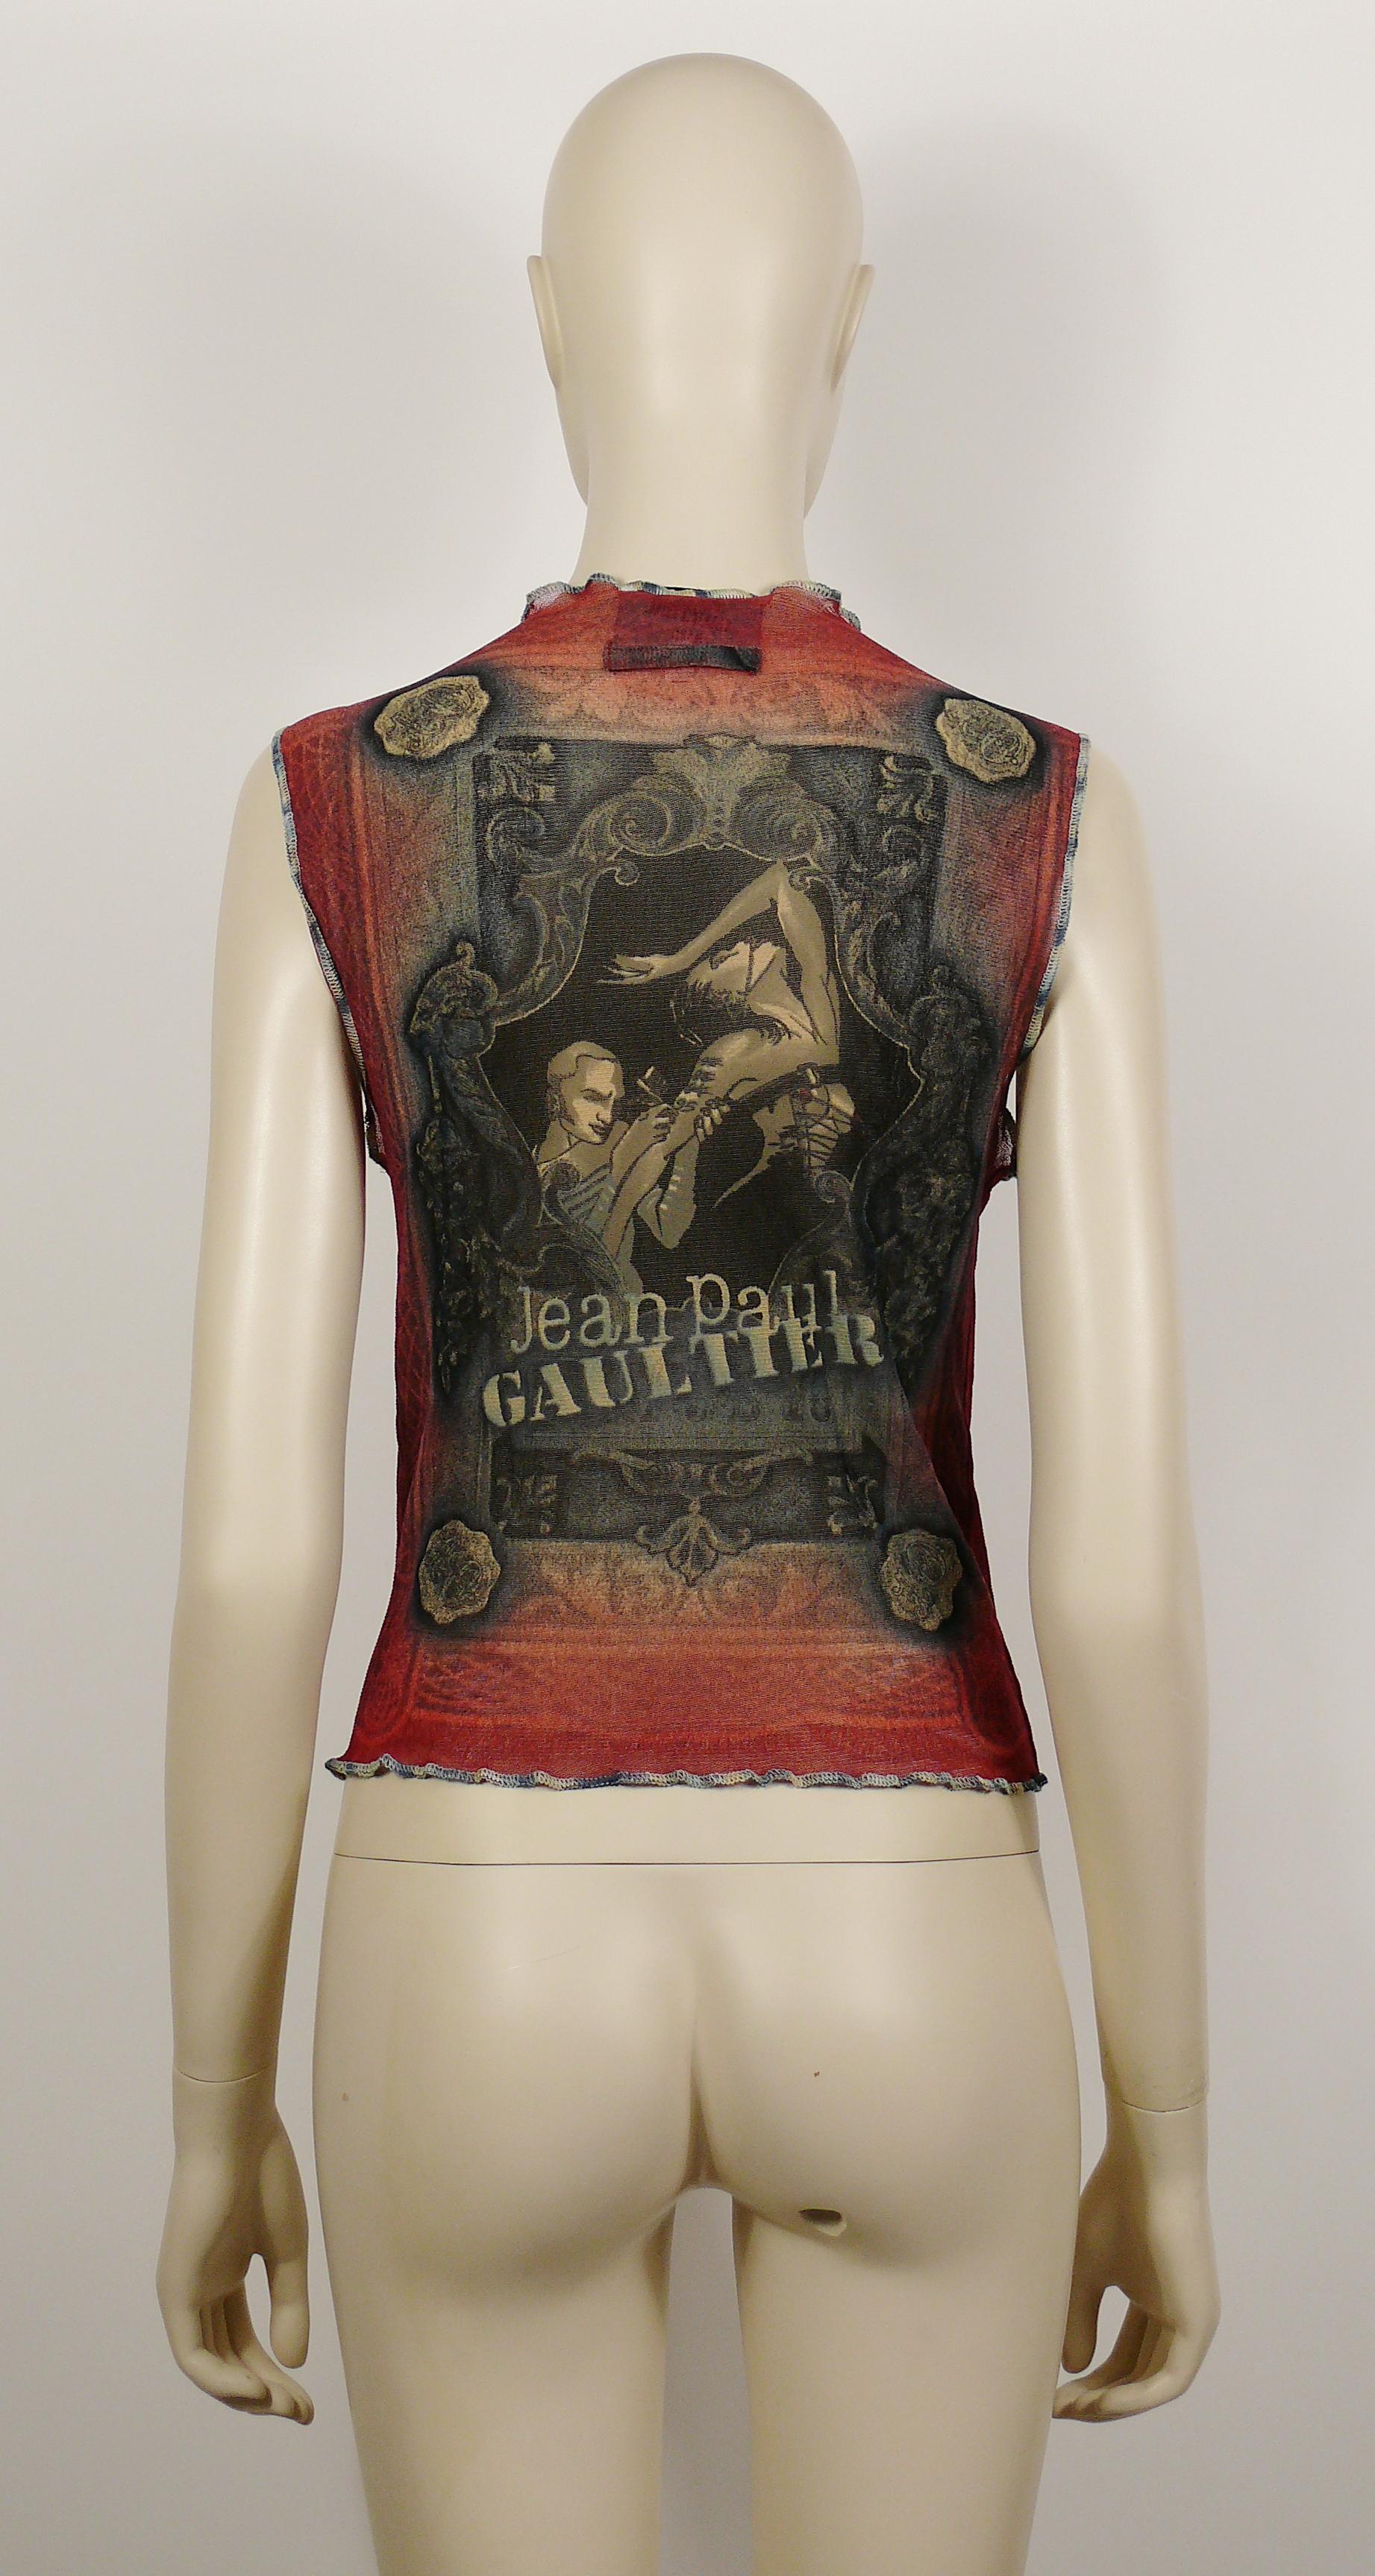 Jean Paul Gaultier Vintage Tattoo Session Print Sheer Mesh Vest with Size XL 1